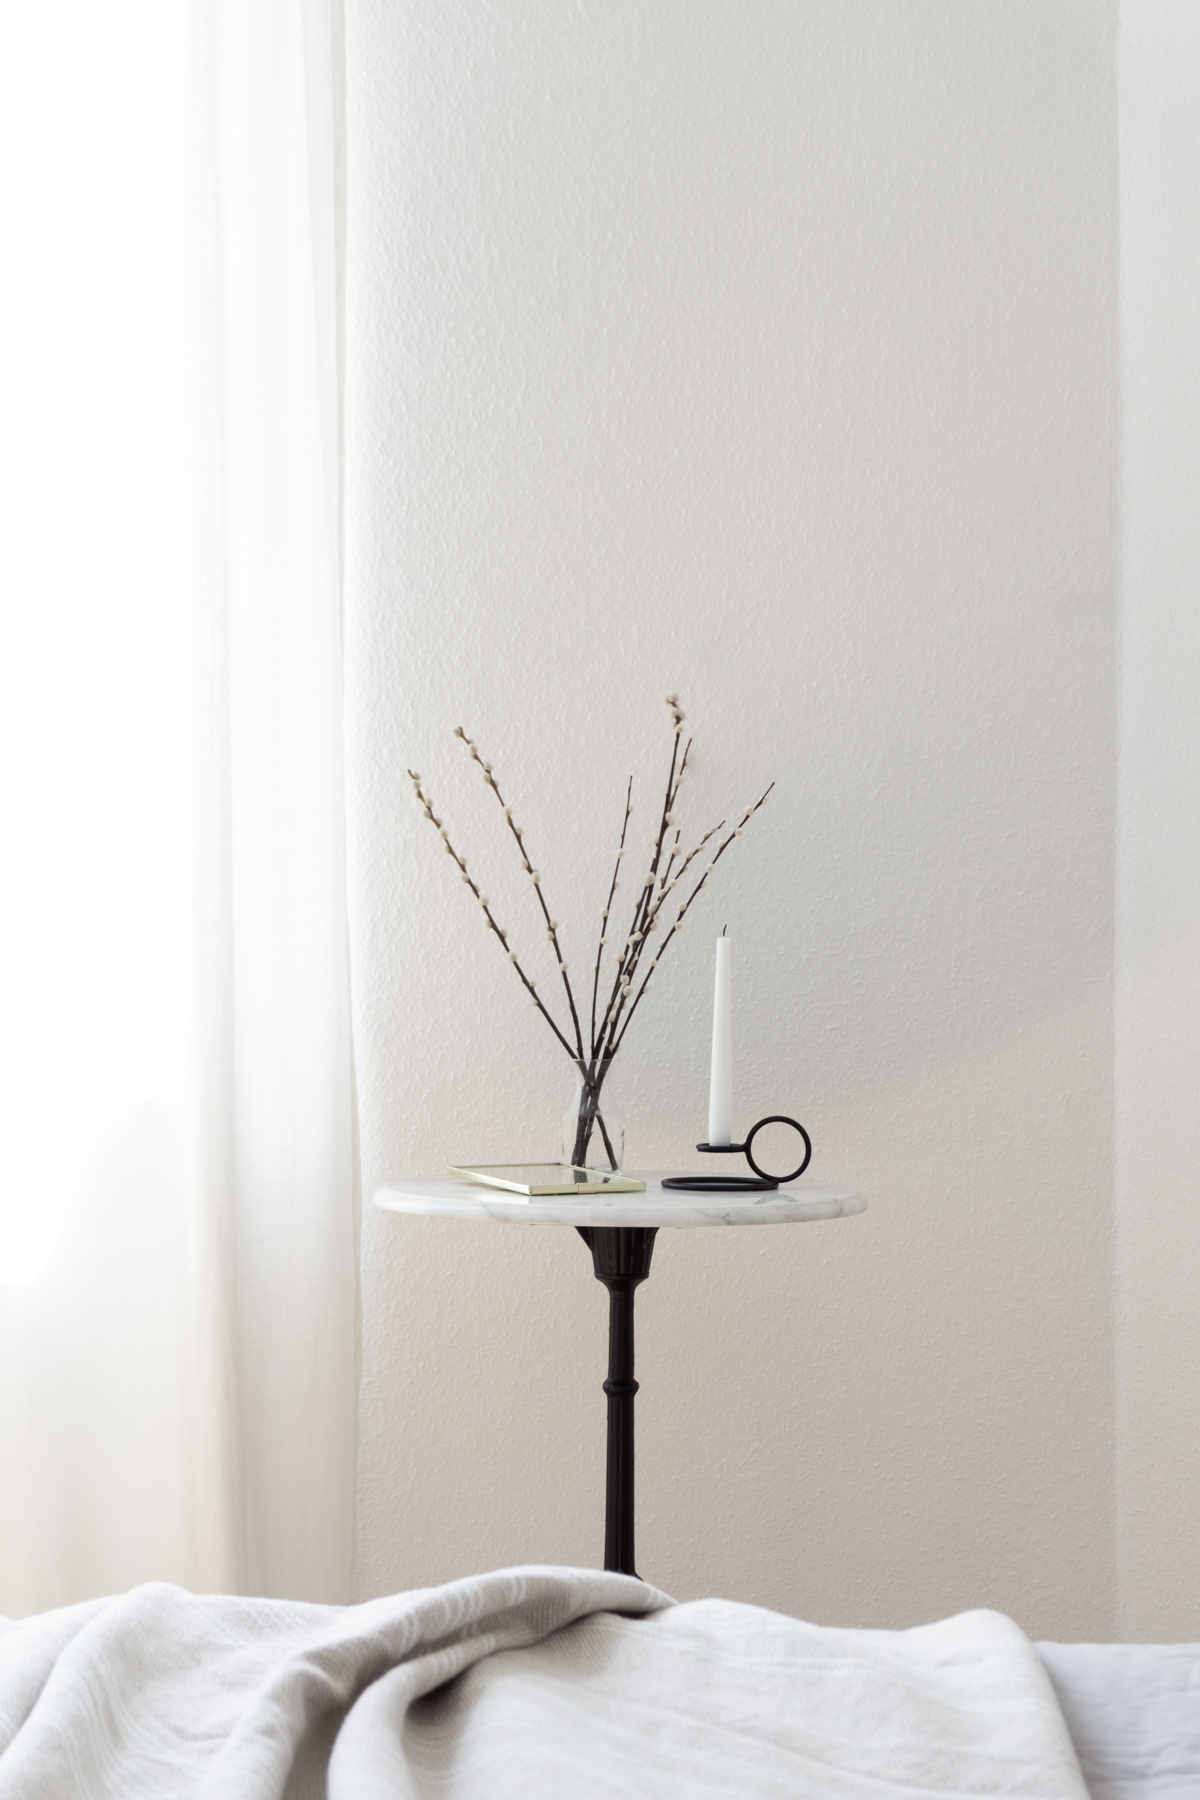 Vintage Marble Cafe Table and Radius Candle Holder by Woud - Scandinavian Interior Style, Minimalist Bedroom - RG Daily Blog